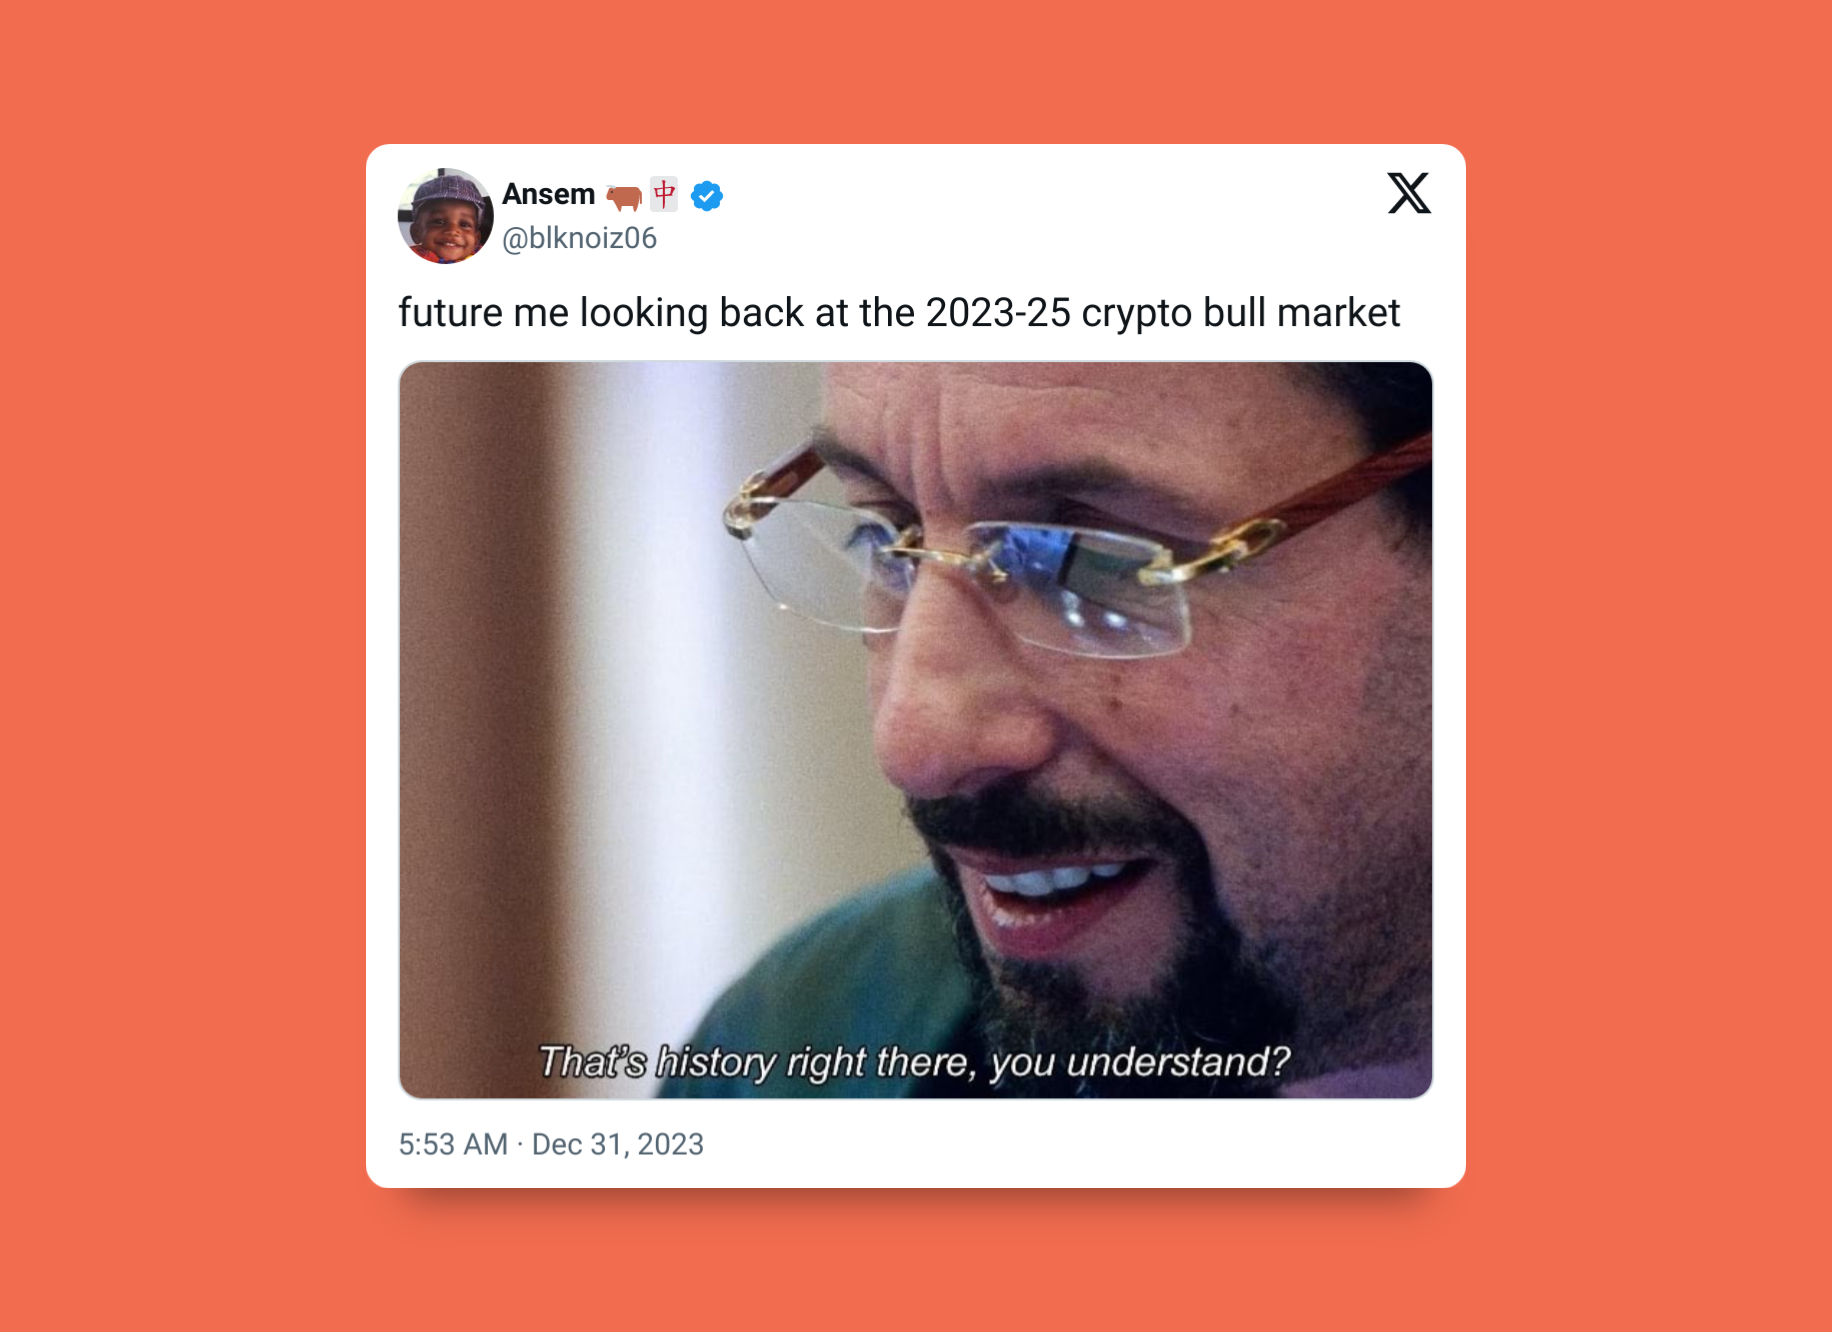 A tweet by user @blknoiz06 saying "future me looking back at the 2023-25 crypto bull market," with a meme below showing Adam Sandler saying "That's history right there, you understand?," on a dark orange background.